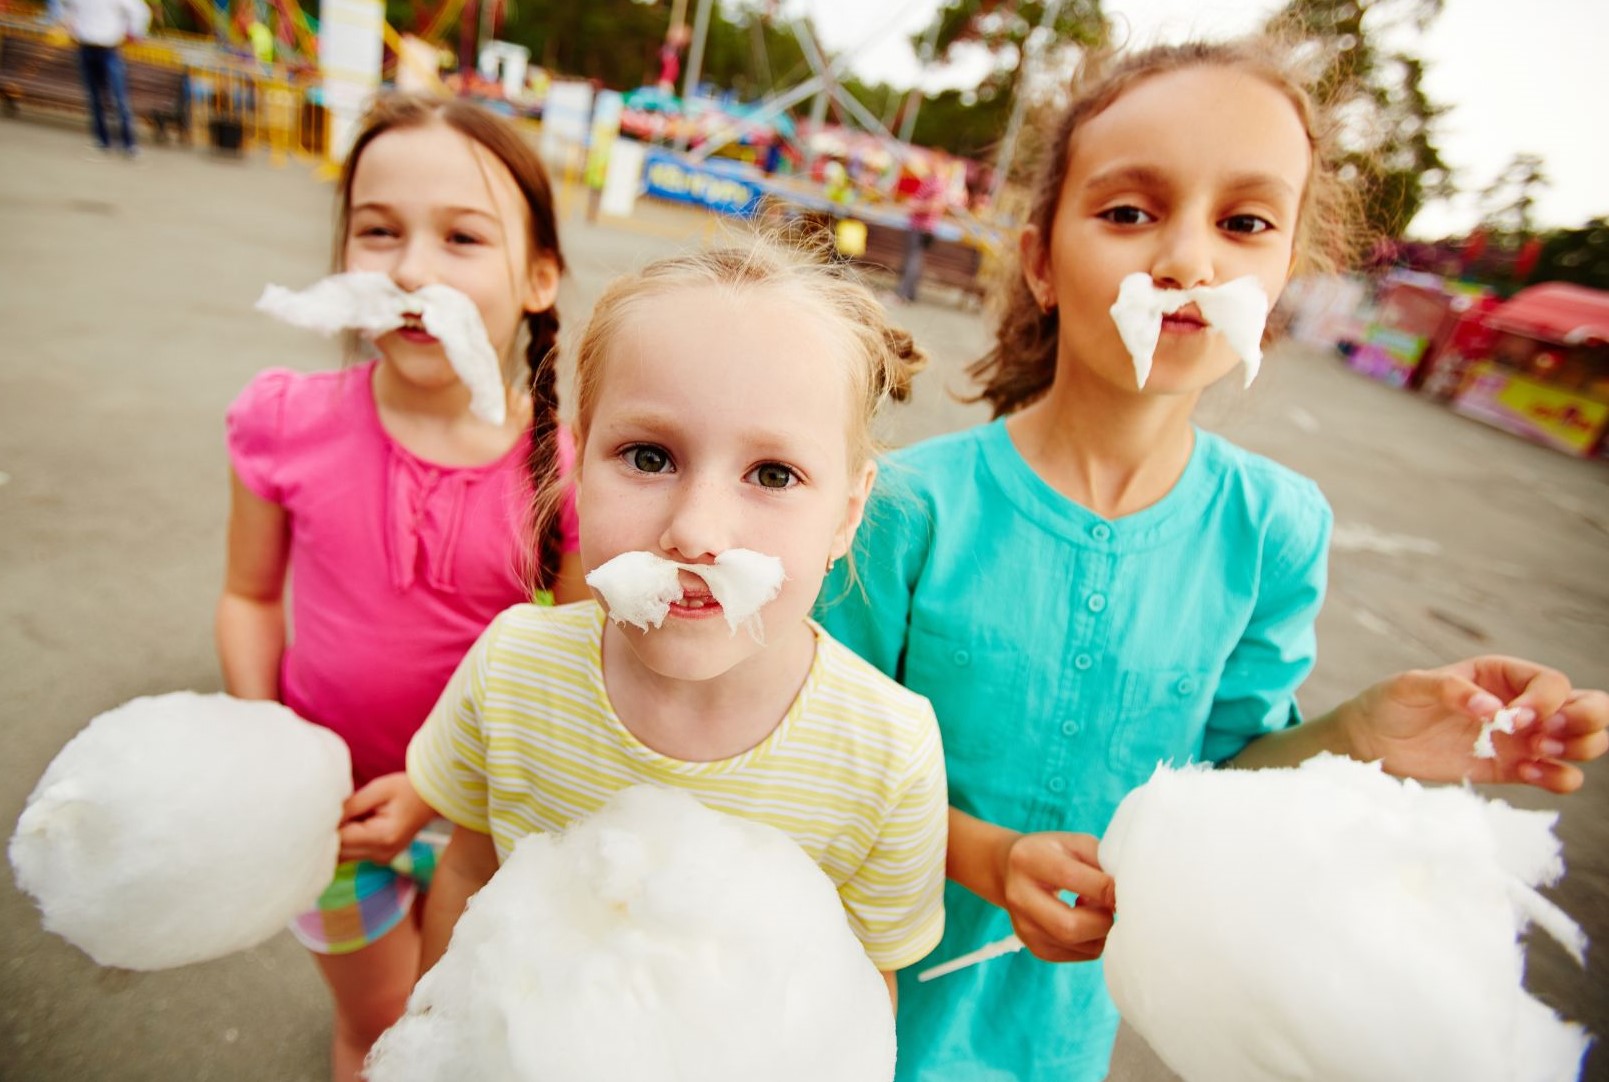 Girls eating cotton candy with bits sticking to their facse.